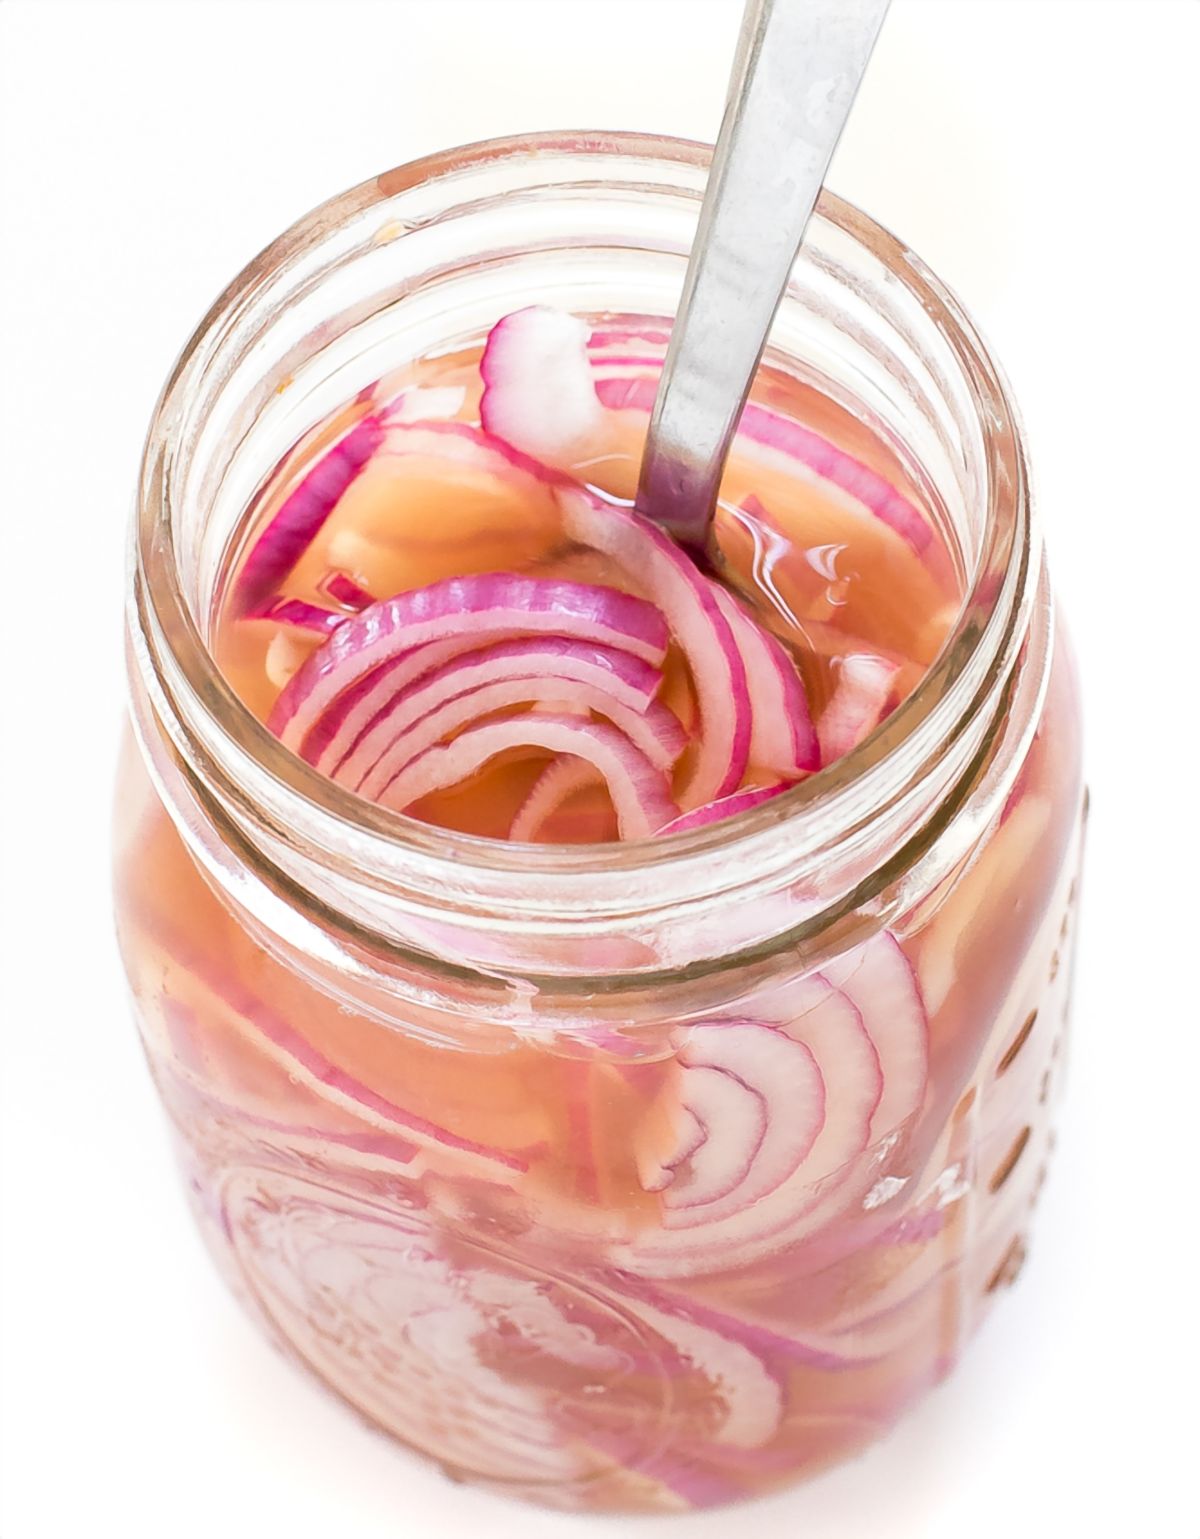 Easy Pickled Red Onions - aninas recipes